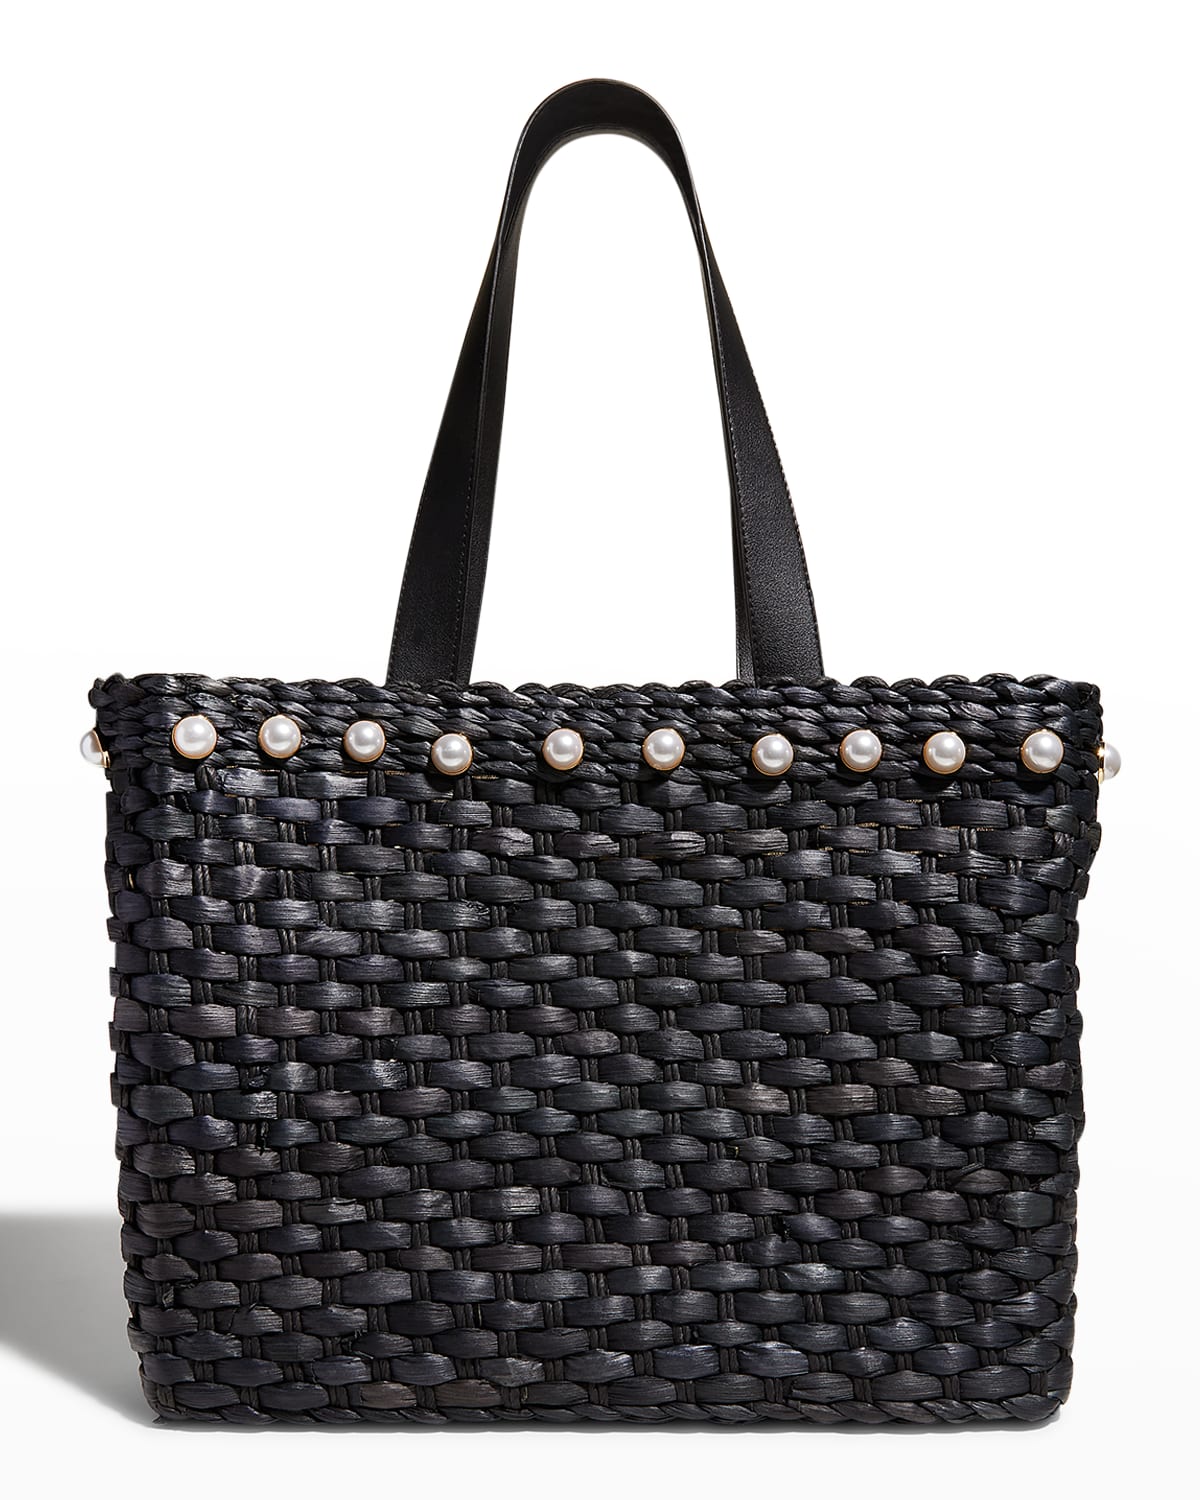 Btb Los Angeles Thea Pearly Woven Straw Tote Bag In Blackpearl